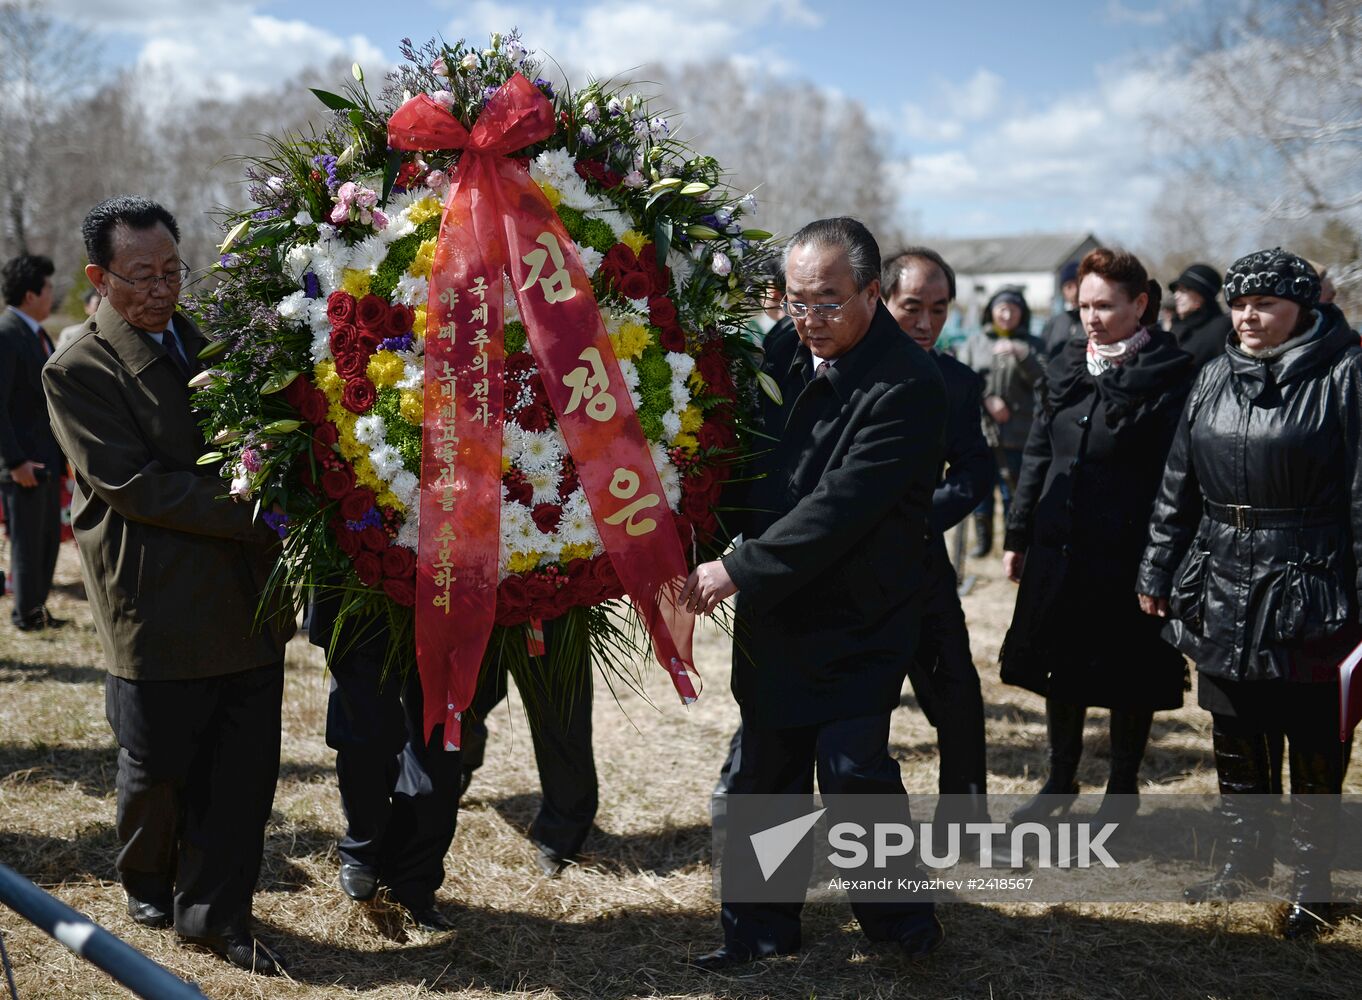 DPRK Ambassador to Russia honors memory of Soviet officer who saved the Life of Kim Il Sung